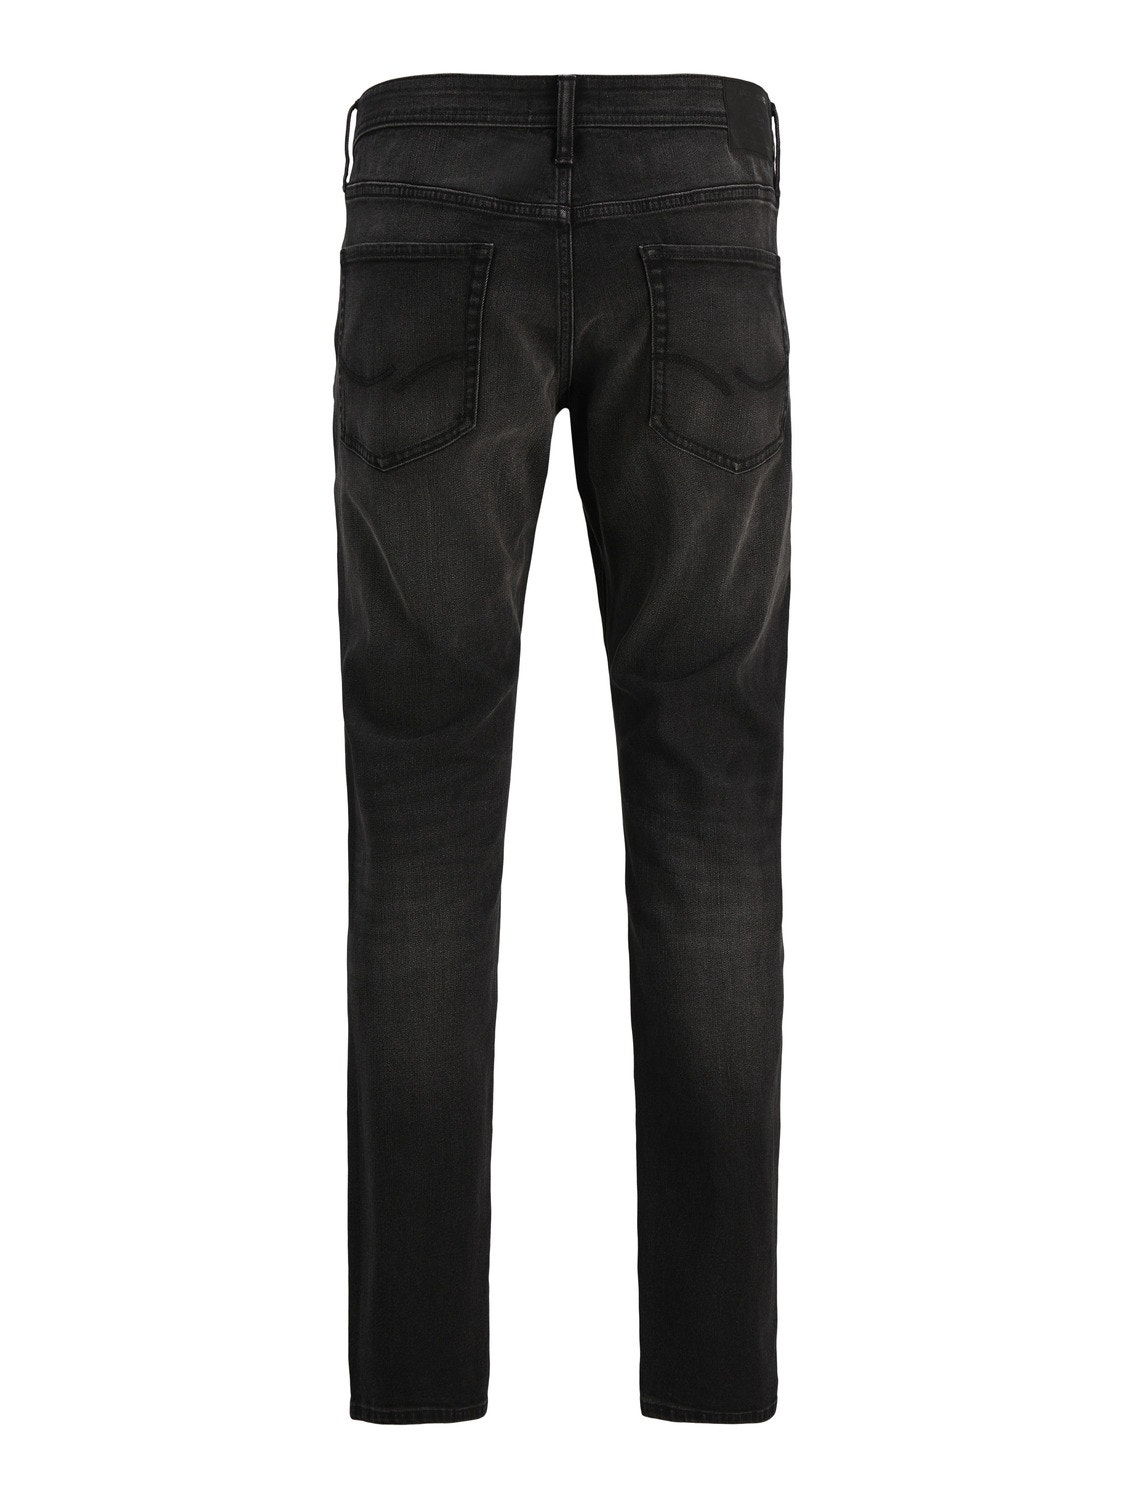 GINASY Black Casual Pants Size L - 53% off